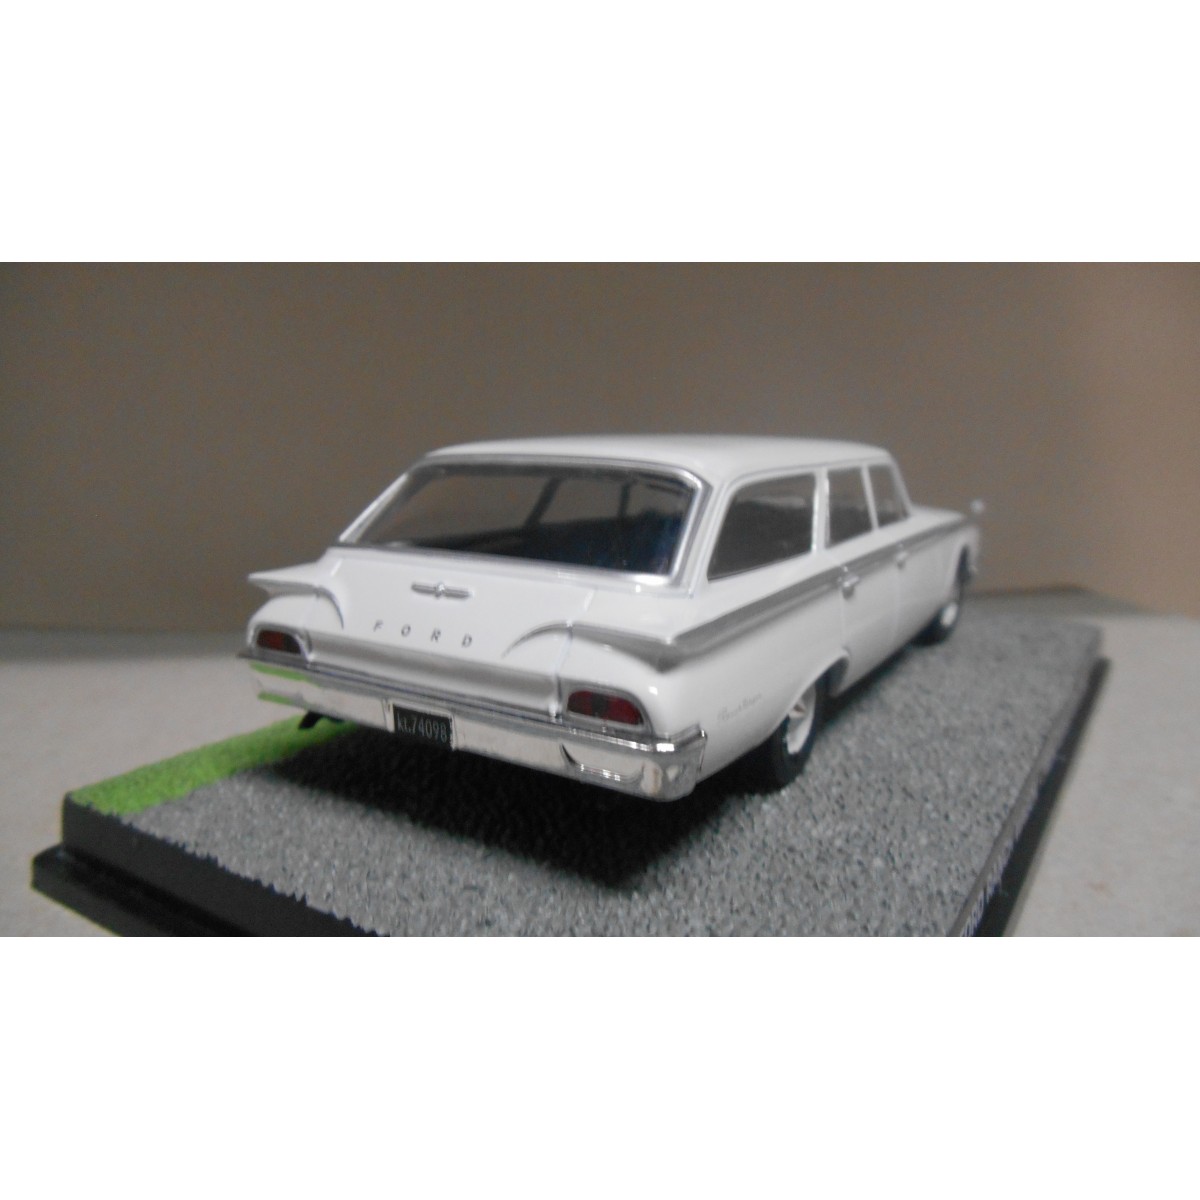 FORD RANCH WAGON FROM RUSSIA WITH LOVE 007 JAMES BOND 1:43 EAGLEMOSS IXO -  BCN STOCK CARS